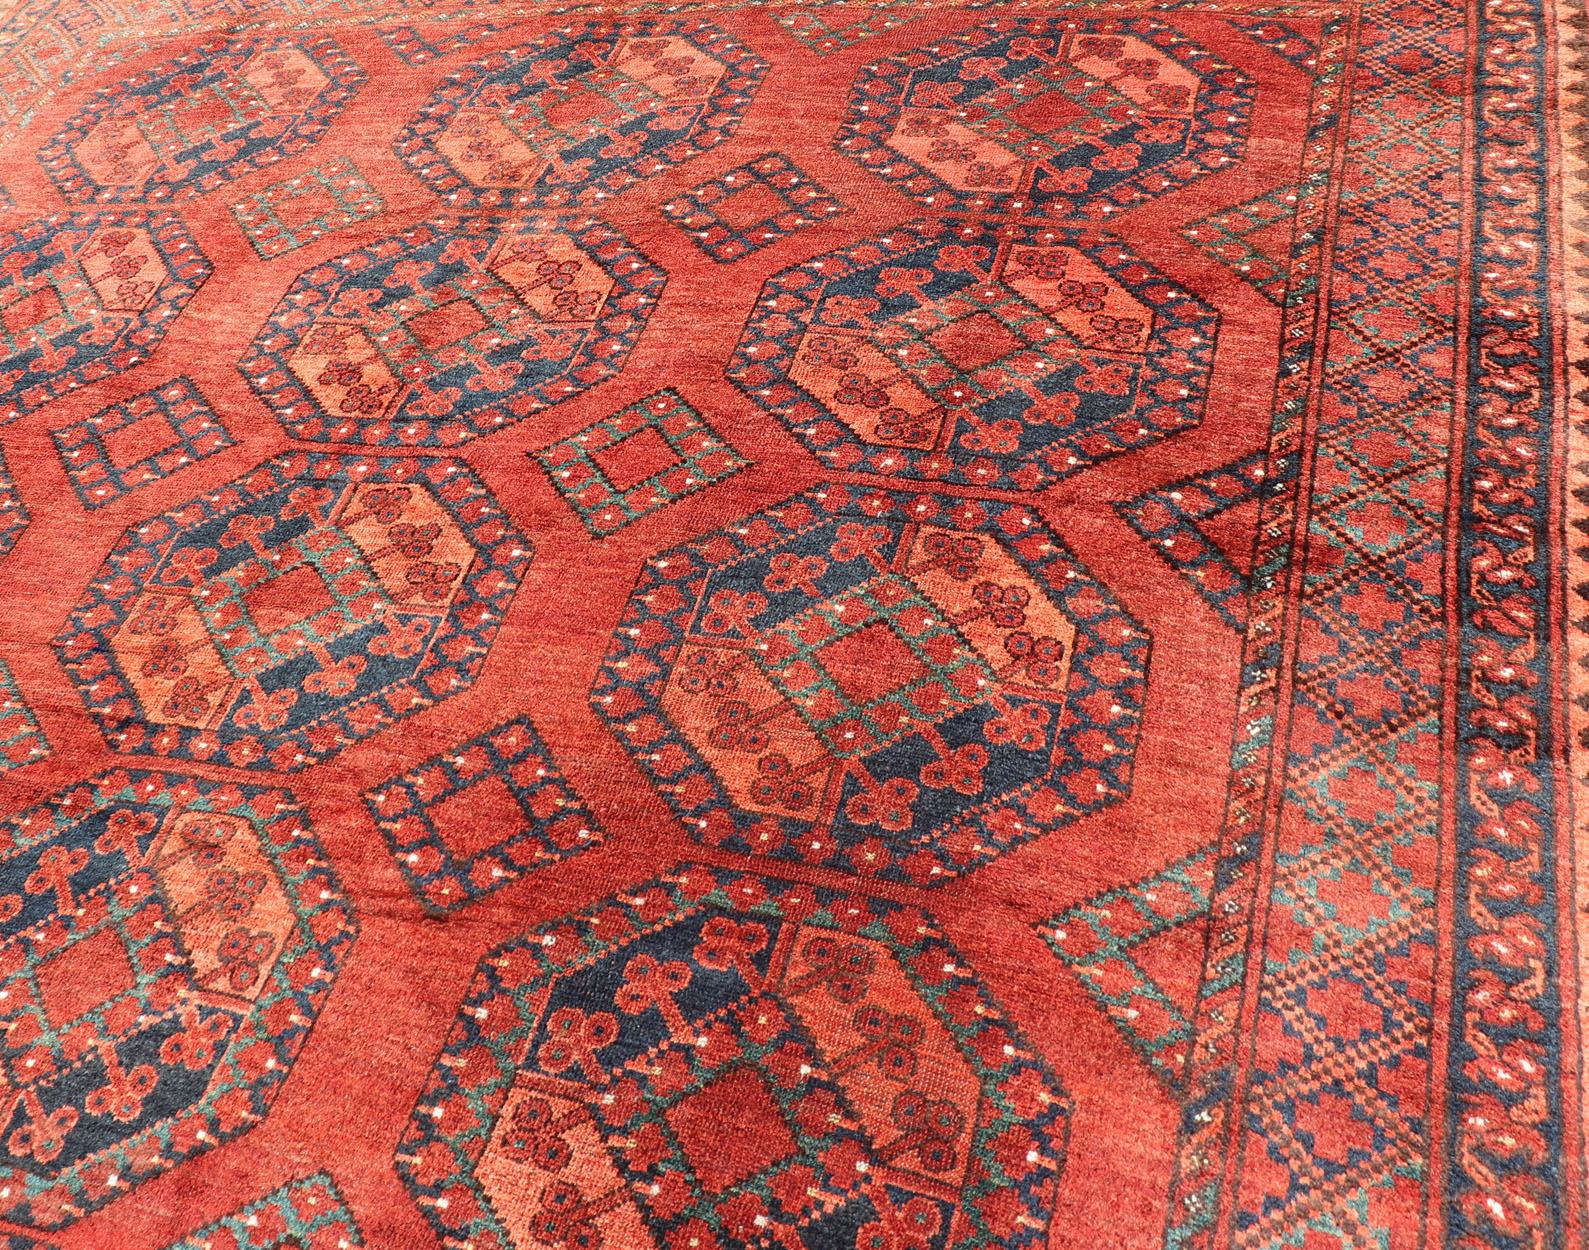 Early 20th Century Hand-Knotted Turkomen Ersari Rug in Wool with Gul Design In Good Condition For Sale In Atlanta, GA